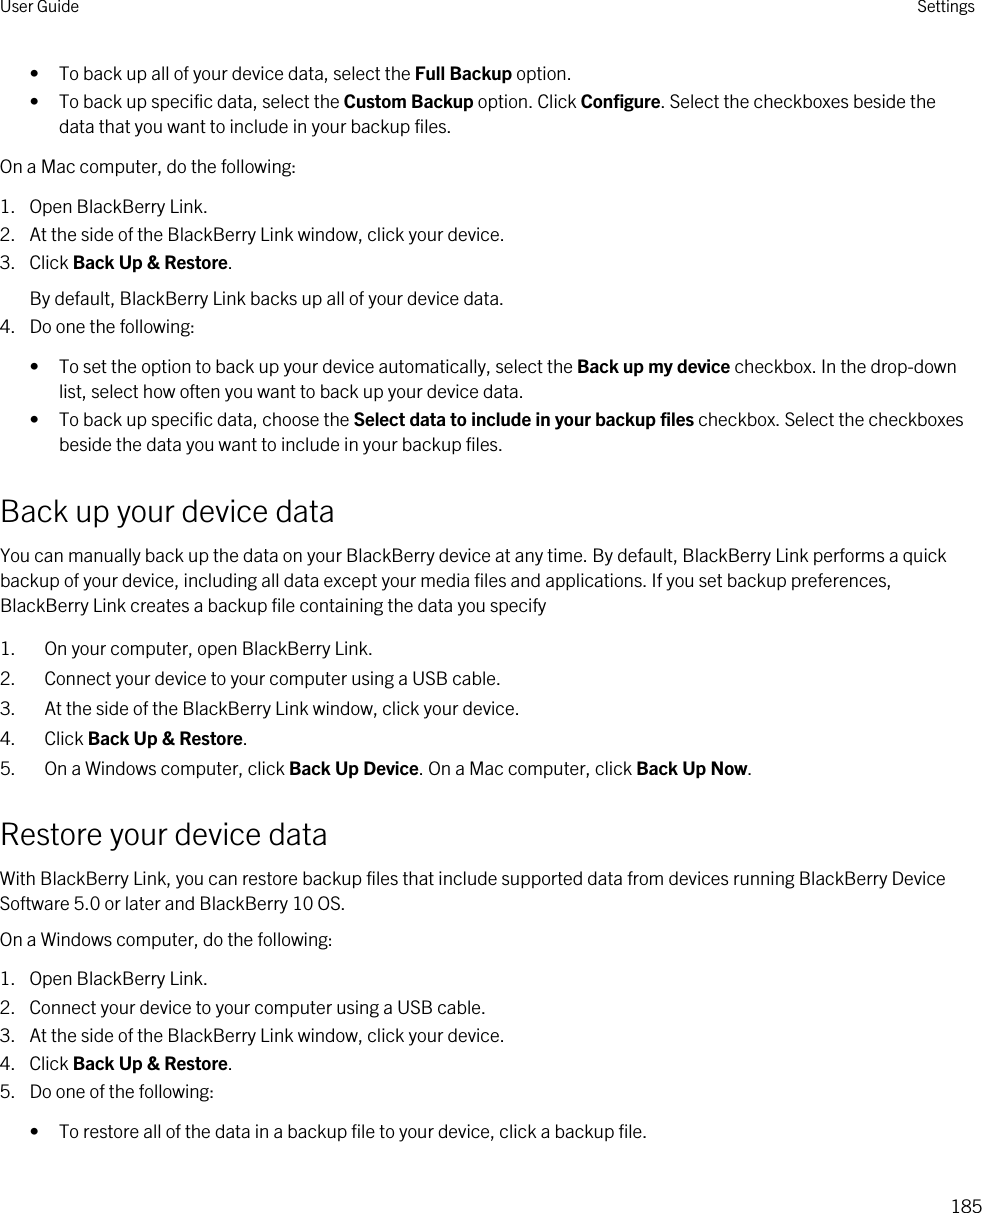 • To back up all of your device data, select the Full Backup option.• To back up specific data, select the Custom Backup option. Click Configure. Select the checkboxes beside the data that you want to include in your backup files.On a Mac computer, do the following:1. Open BlackBerry Link.2. At the side of the BlackBerry Link window, click your device.3. Click Back Up &amp; Restore.By default, BlackBerry Link backs up all of your device data.4. Do one the following:• To set the option to back up your device automatically, select the Back up my device checkbox. In the drop-down list, select how often you want to back up your device data.• To back up specific data, choose the Select data to include in your backup files checkbox. Select the checkboxes beside the data you want to include in your backup files.Back up your device dataYou can manually back up the data on your BlackBerry device at any time. By default, BlackBerry Link performs a quick backup of your device, including all data except your media files and applications. If you set backup preferences, BlackBerry Link creates a backup file containing the data you specify1. On your computer, open BlackBerry Link.2. Connect your device to your computer using a USB cable.3. At the side of the BlackBerry Link window, click your device.4. Click Back Up &amp; Restore.5. On a Windows computer, click Back Up Device. On a Mac computer, click Back Up Now.Restore your device dataWith BlackBerry Link, you can restore backup files that include supported data from devices running BlackBerry Device Software 5.0 or later and BlackBerry 10 OS.On a Windows computer, do the following:1. Open BlackBerry Link.2. Connect your device to your computer using a USB cable.3. At the side of the BlackBerry Link window, click your device.4. Click Back Up &amp; Restore.5. Do one of the following:• To restore all of the data in a backup file to your device, click a backup file.User Guide Settings185